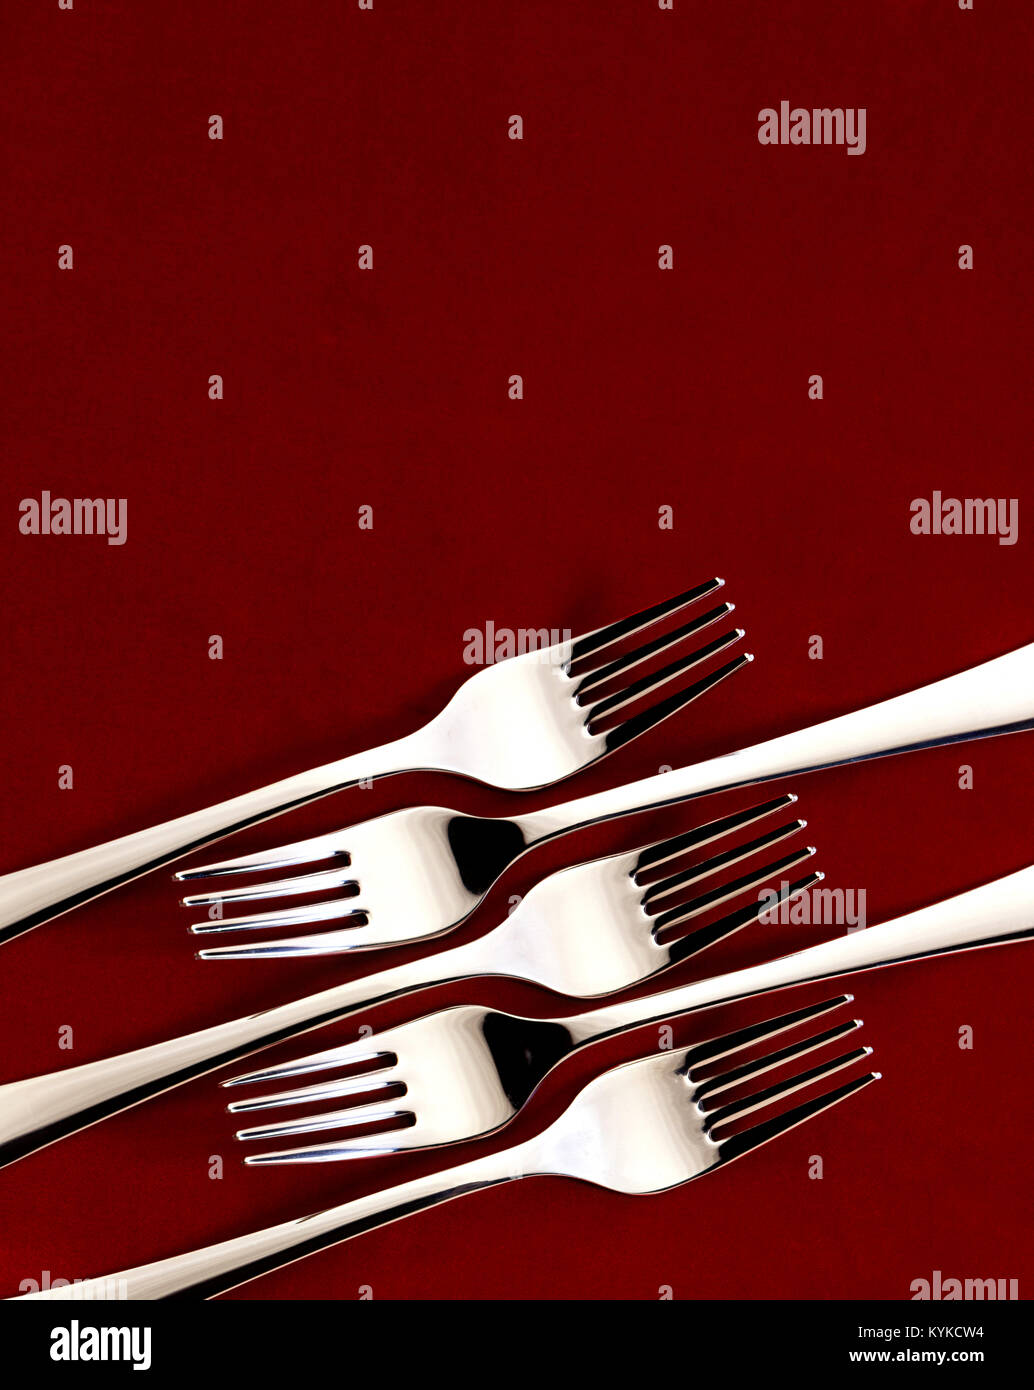 Forks on a table, graphic Stock Photo